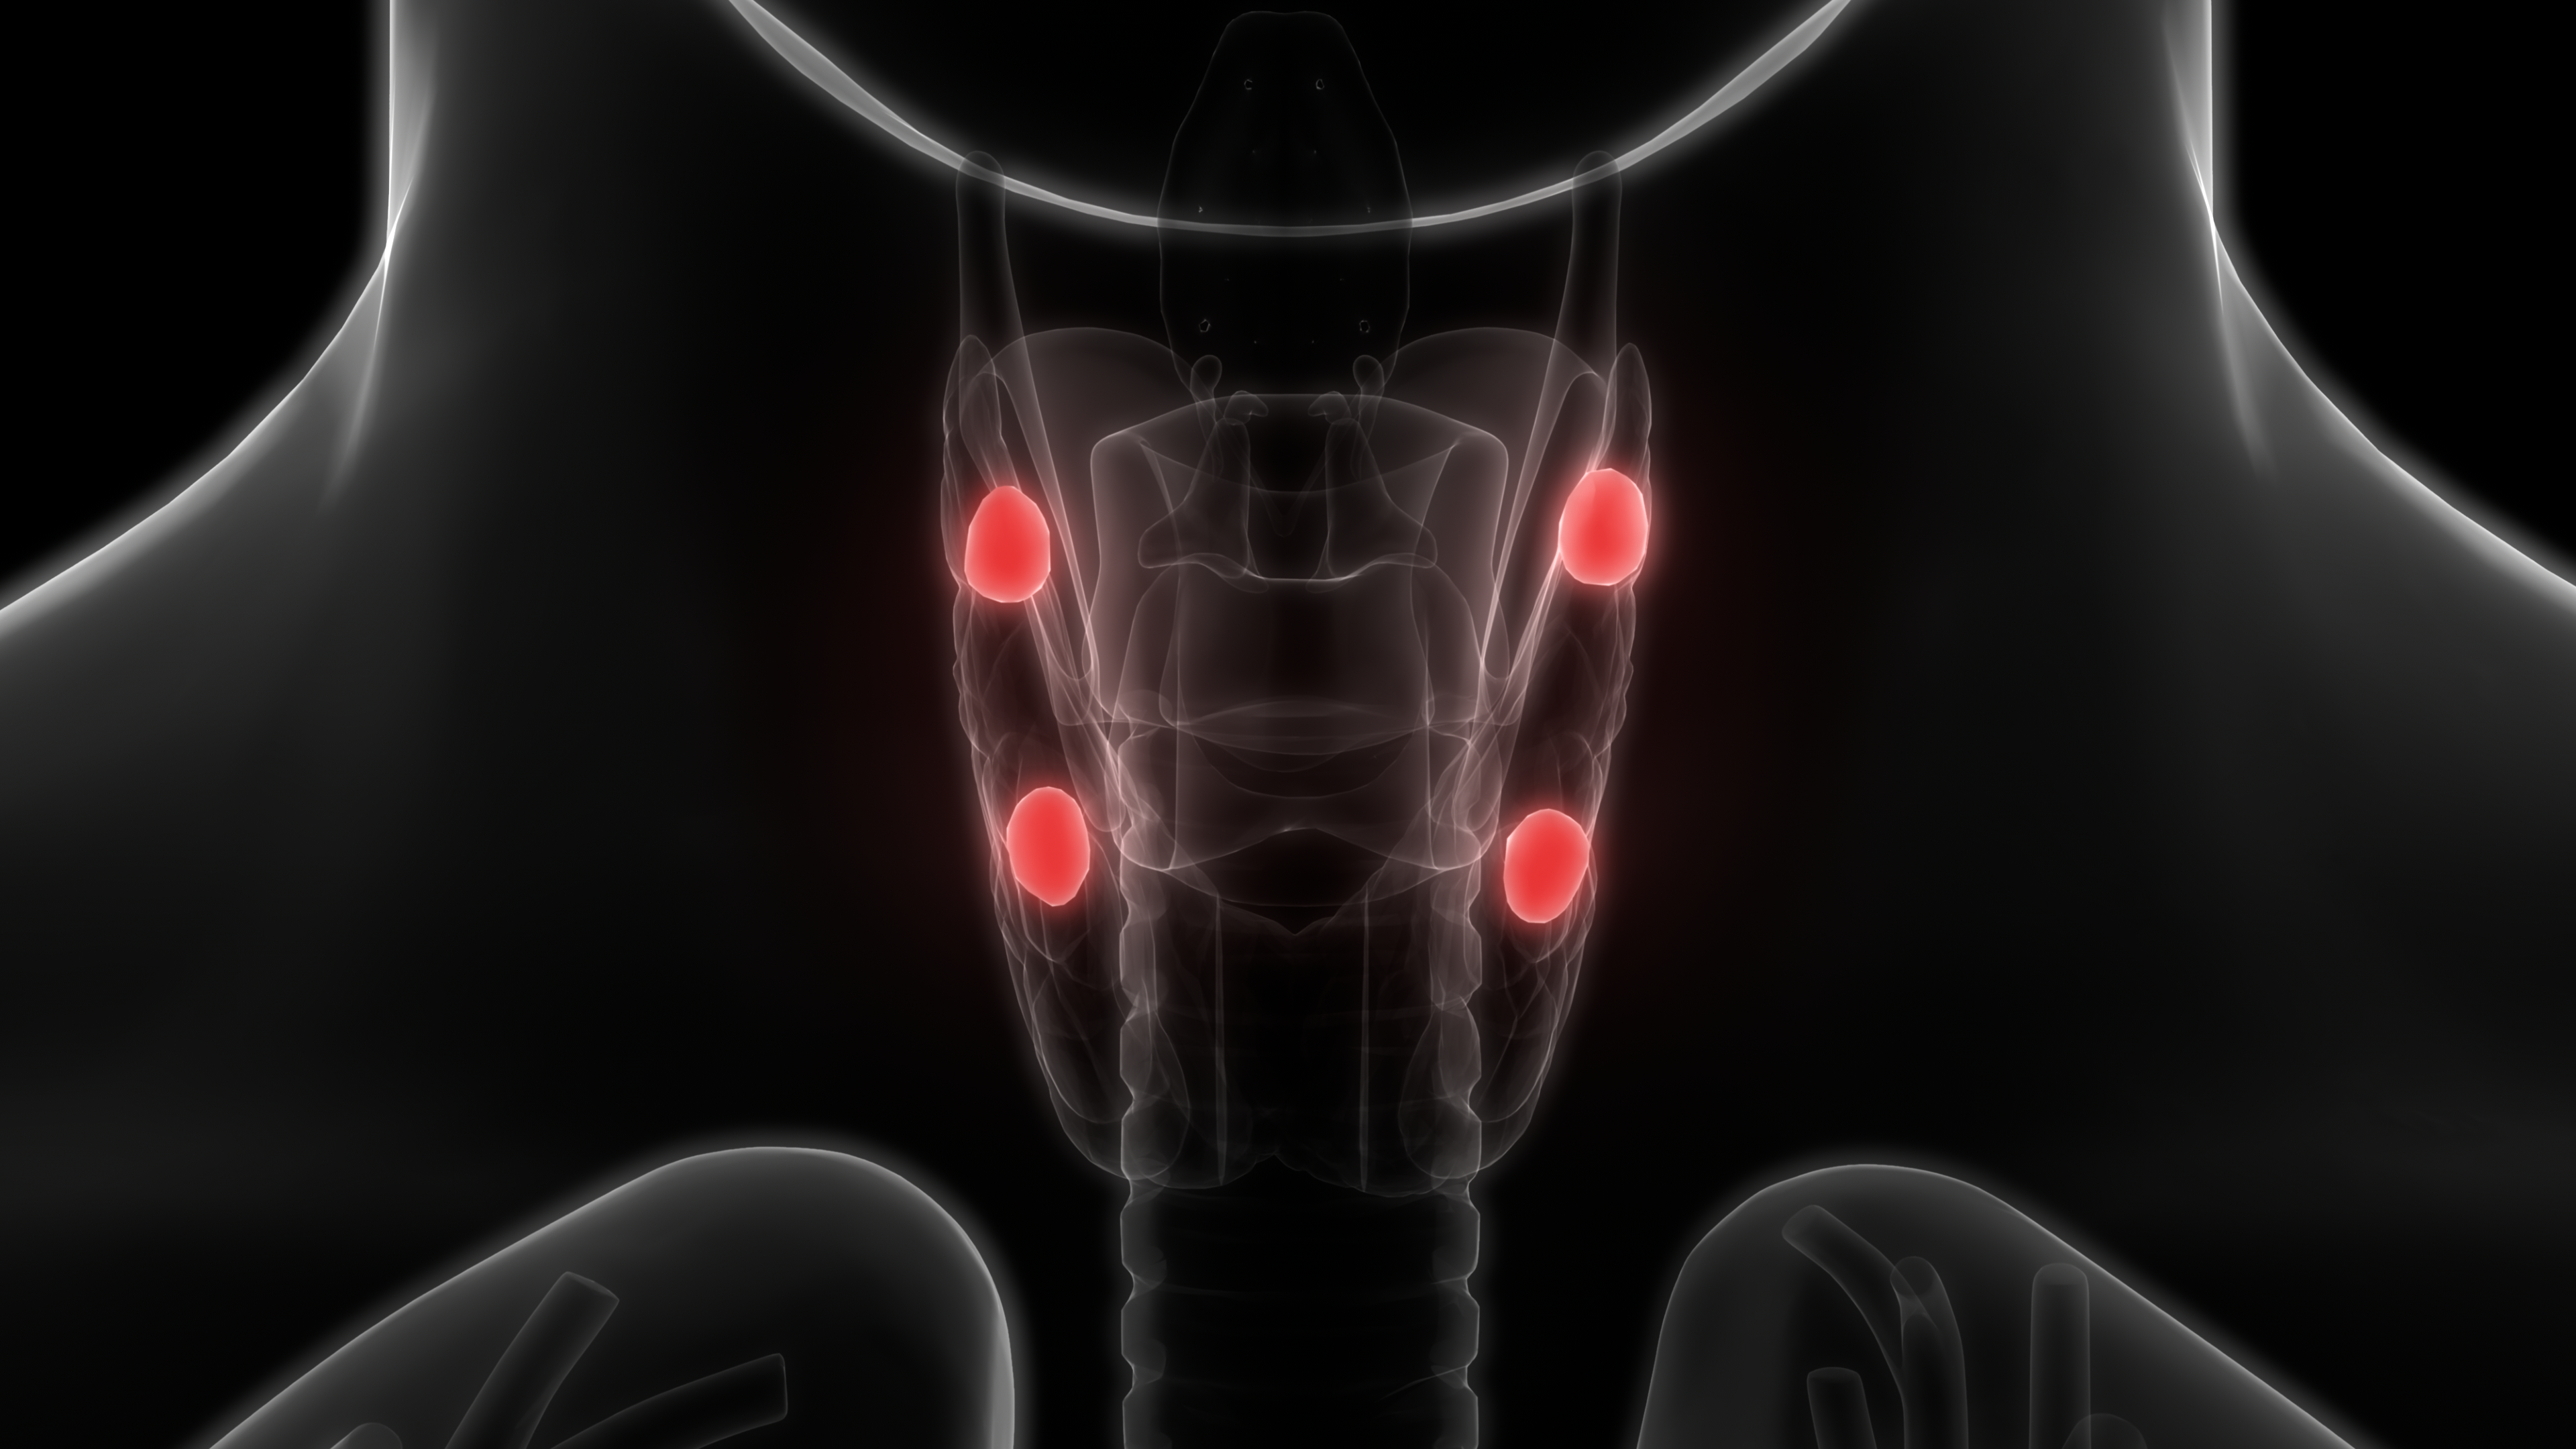 A medical illustration showing the location of the parathyroid glands on the human body.